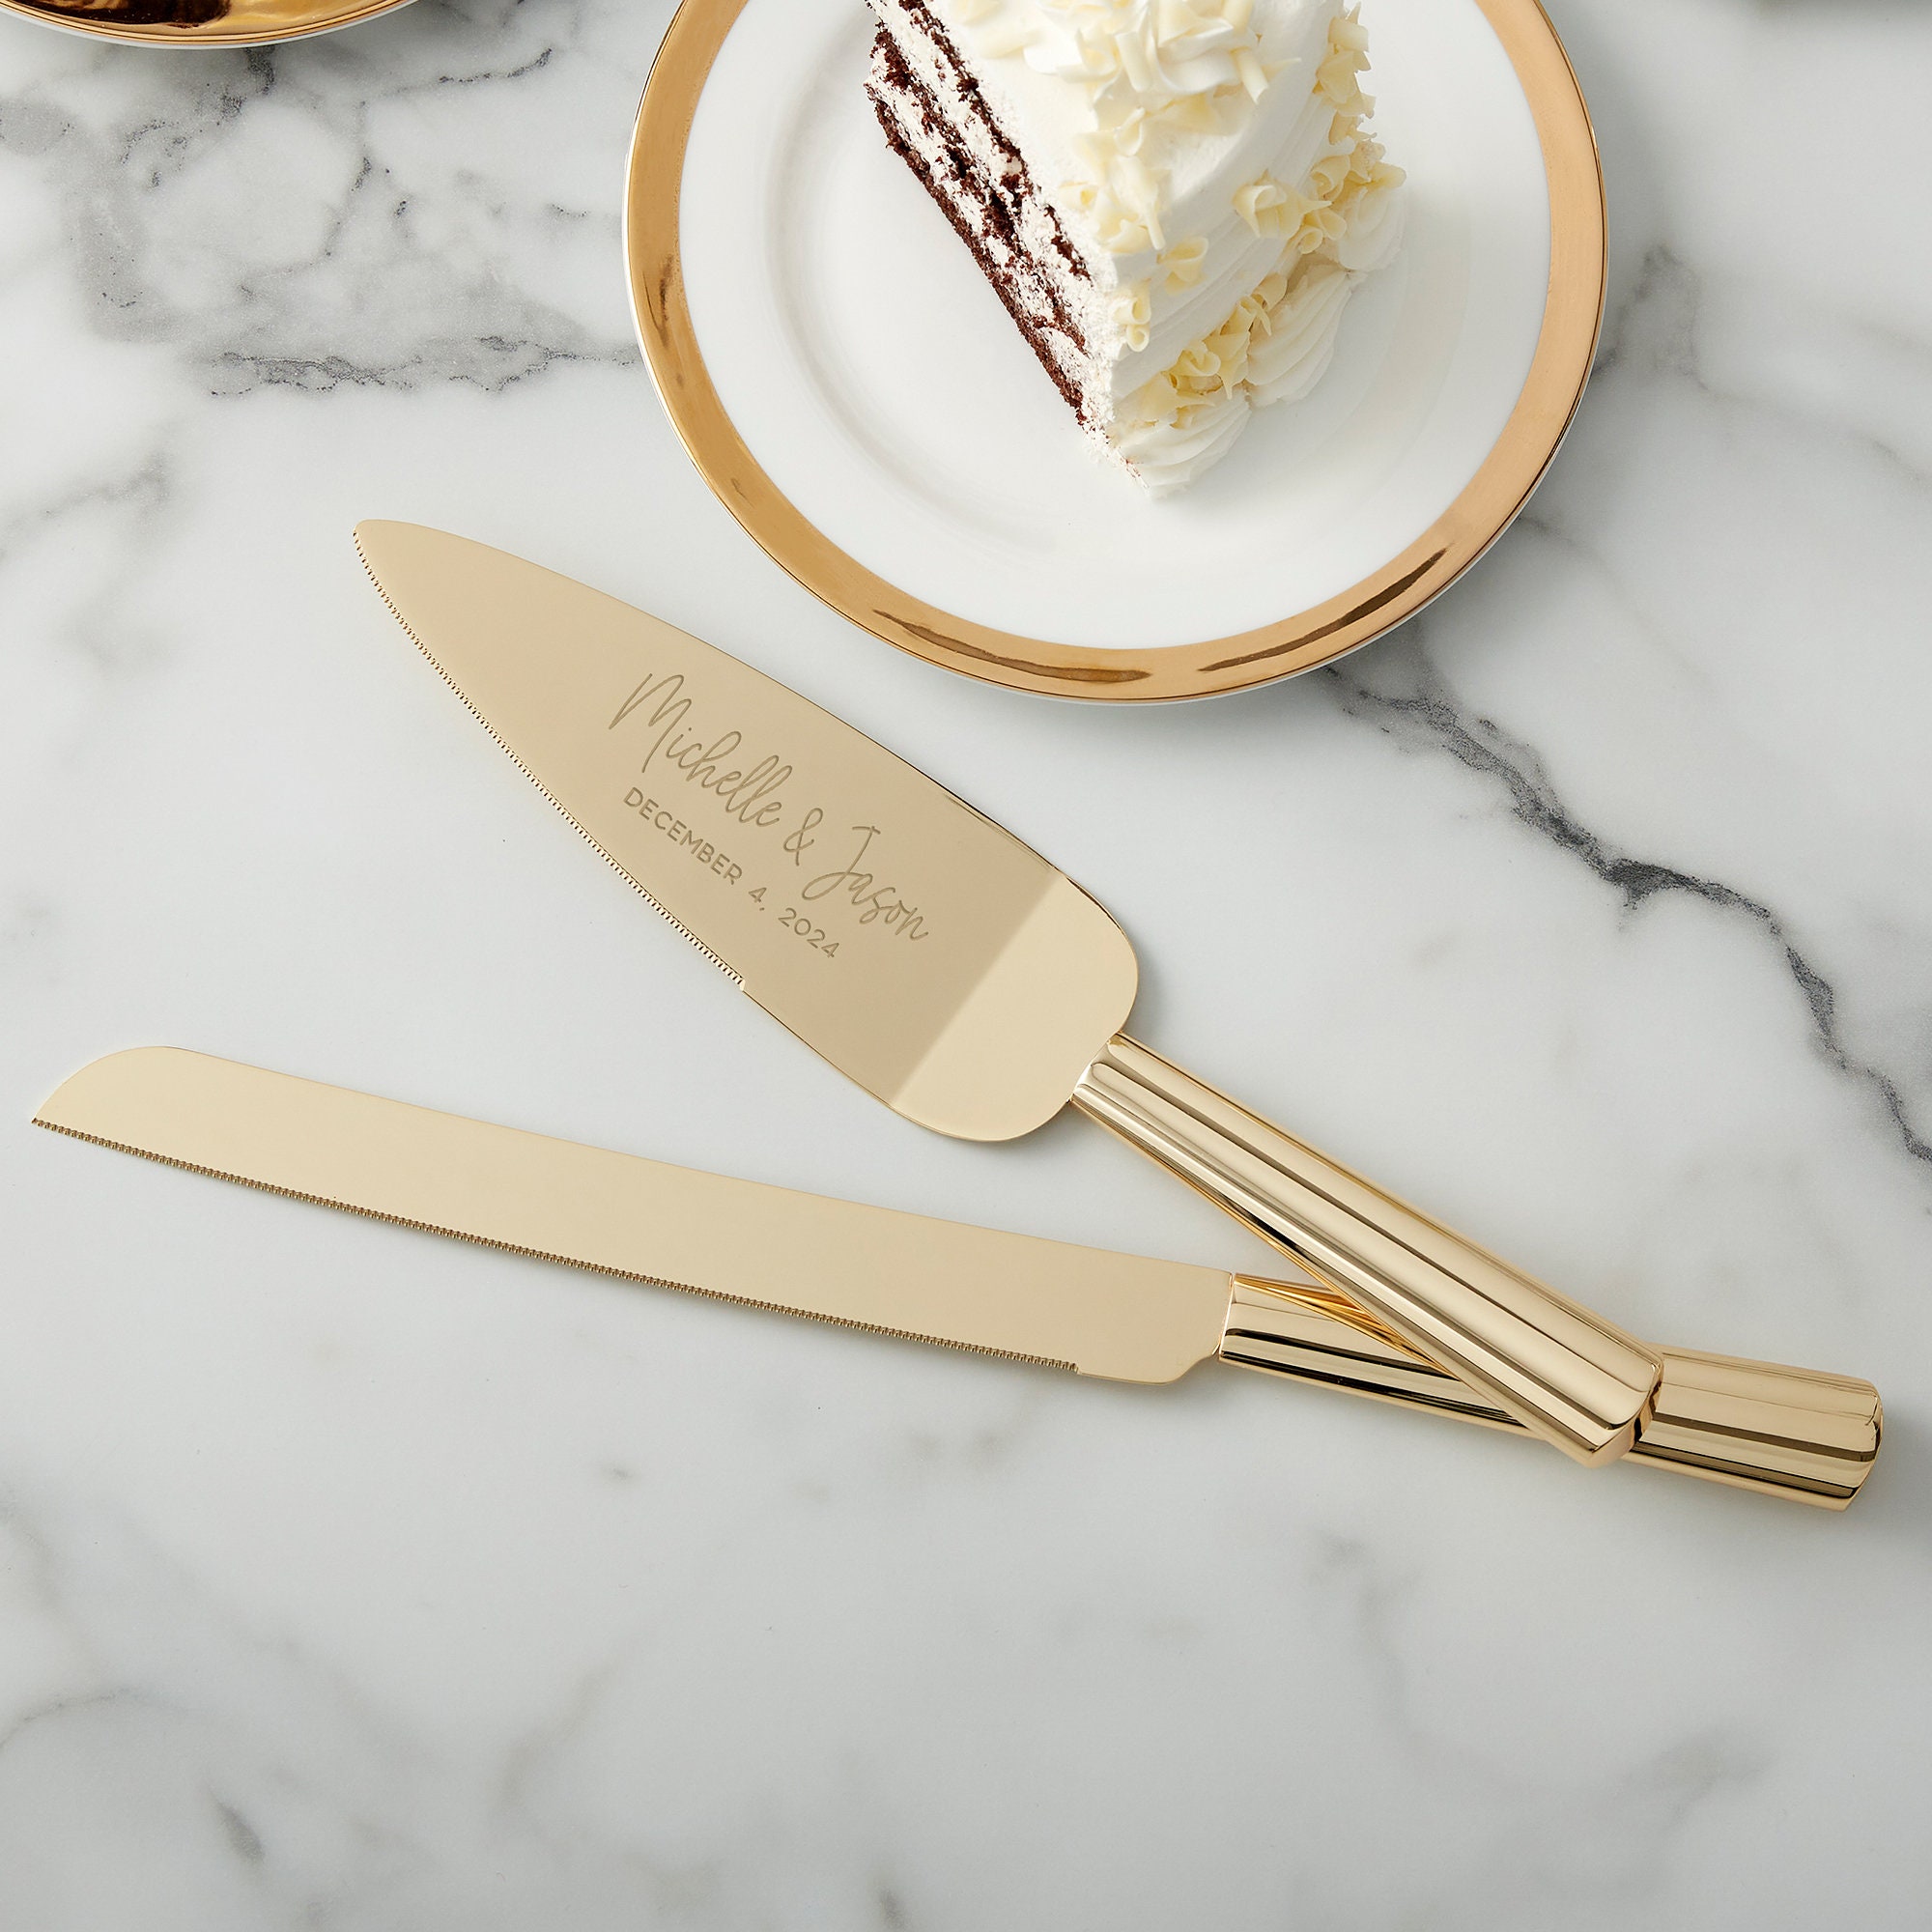 Wood and Gold Cake Serving Set | Style Me Pretty